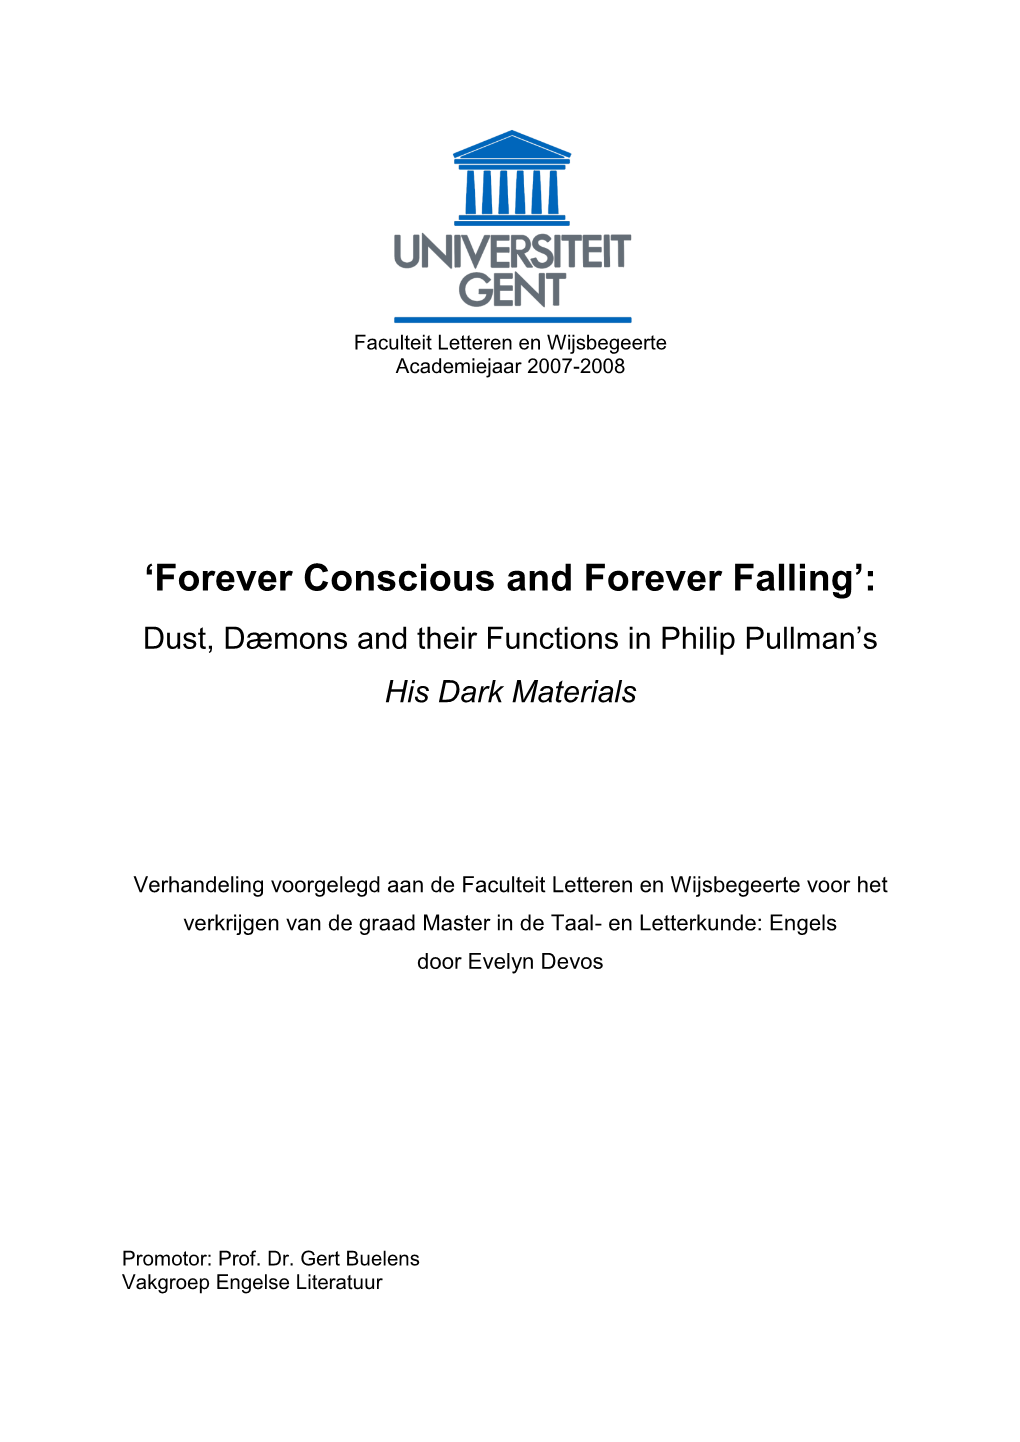 'Forever Conscious and Forever Falling'